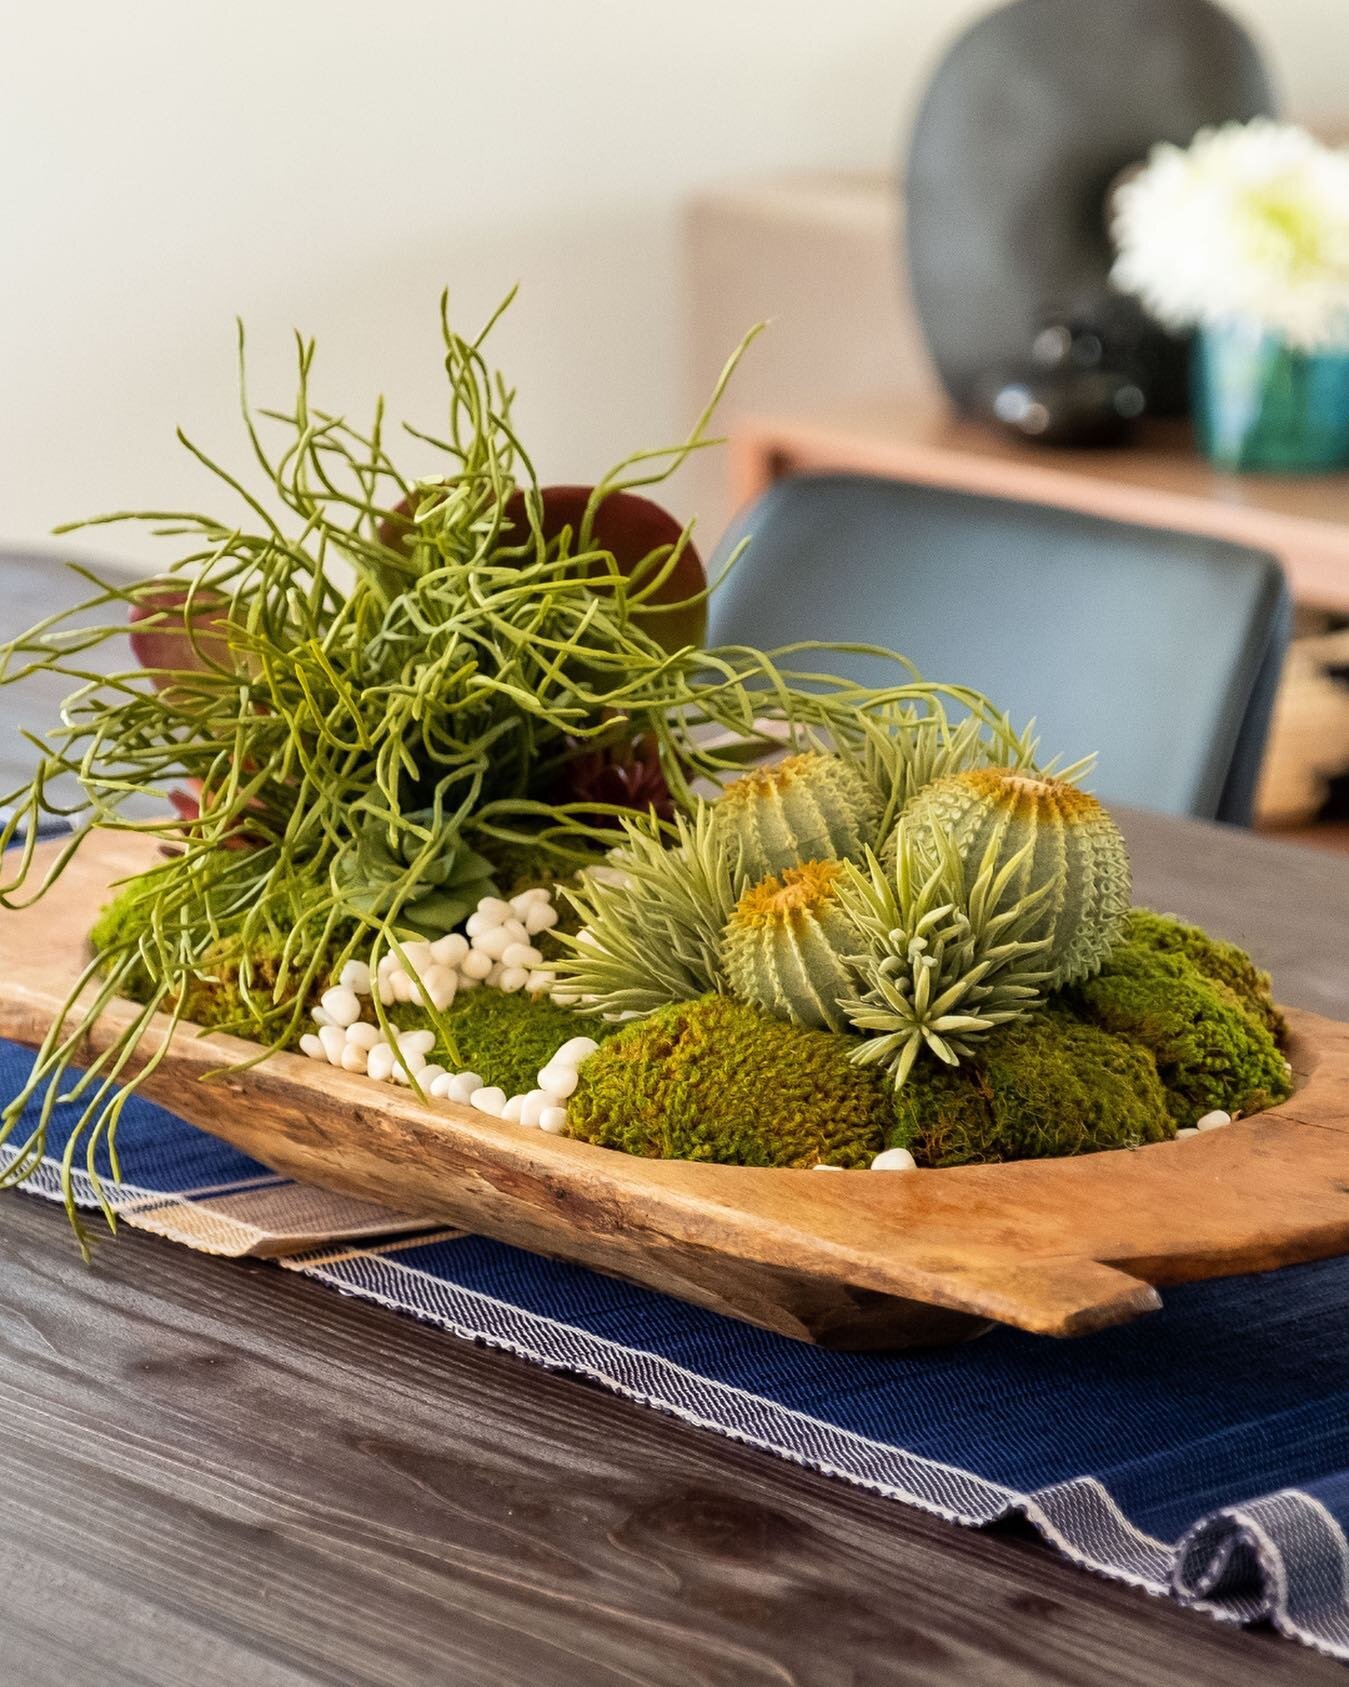 Simple centerpiece alert. 📣

A pretty bread bowl with an arrangement of succulents is easy to maintain, looks great with almost any decor, and won&rsquo;t block your view of the fam across the table. 🙌🏻

Design by @asrdesignstudio 

Photo by @hale